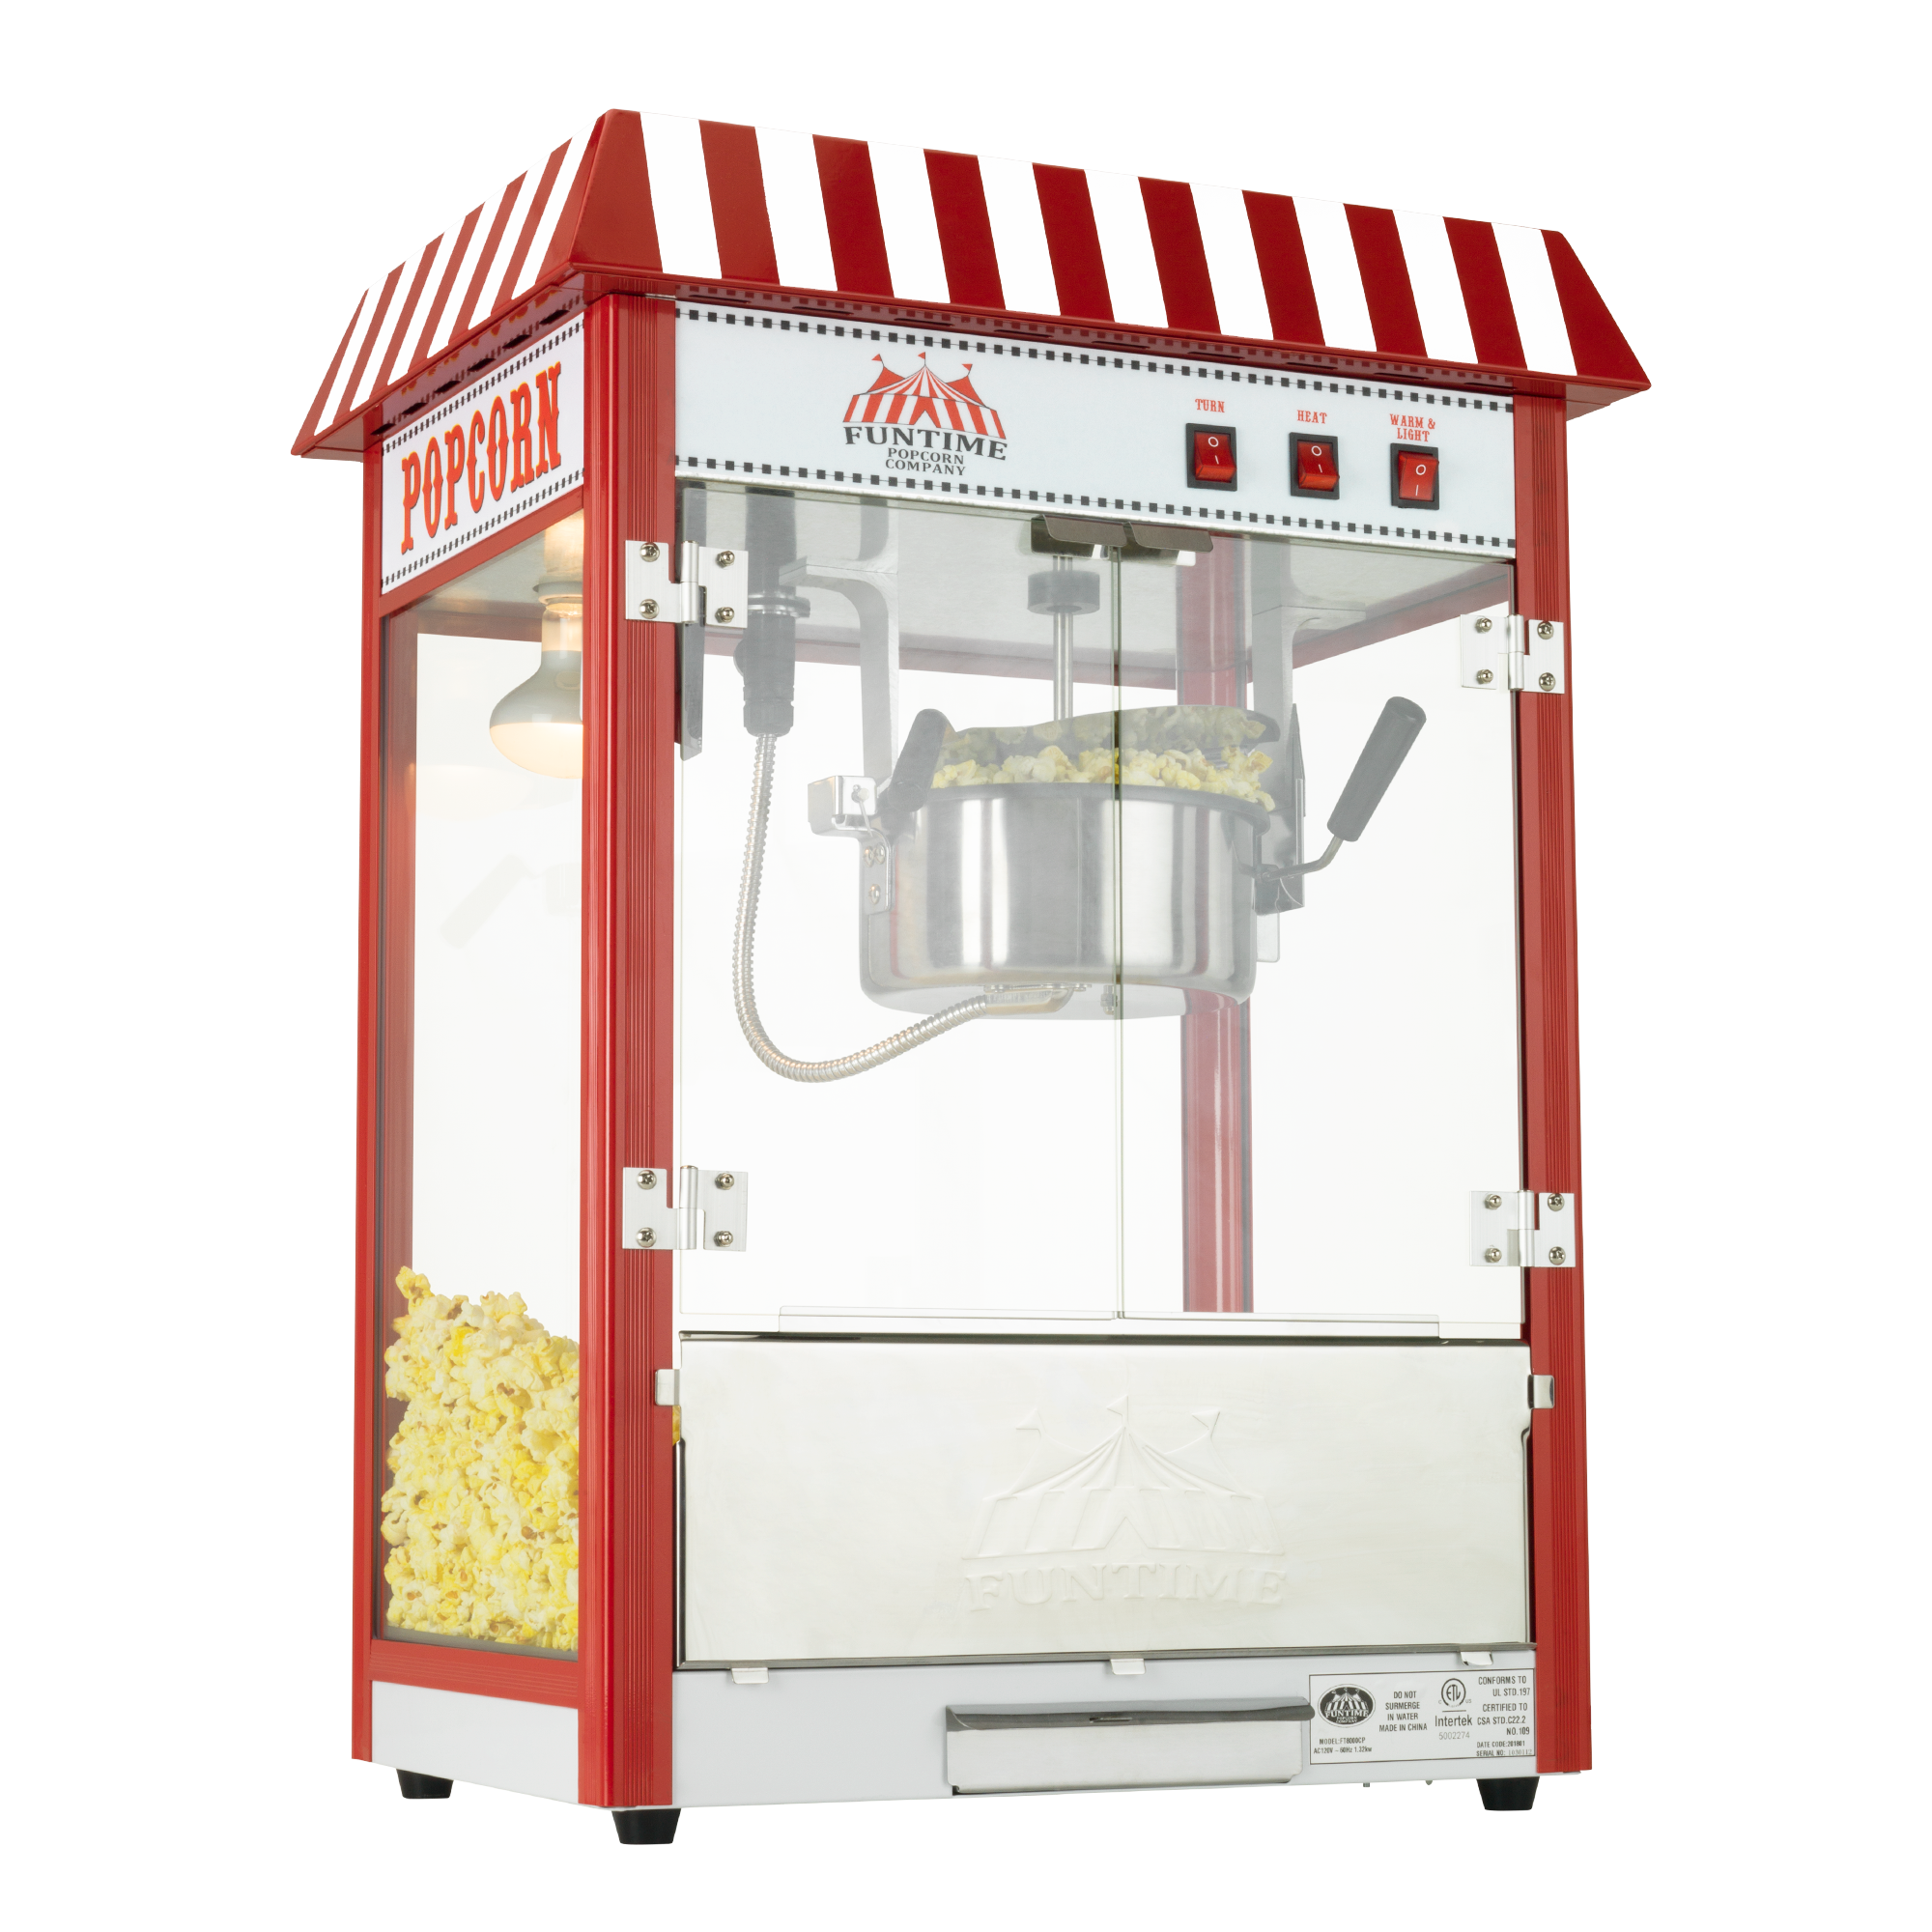 Funtime FT8000CP 8 oz Commercial Carnival Bar Style Popcorn Popper Machine